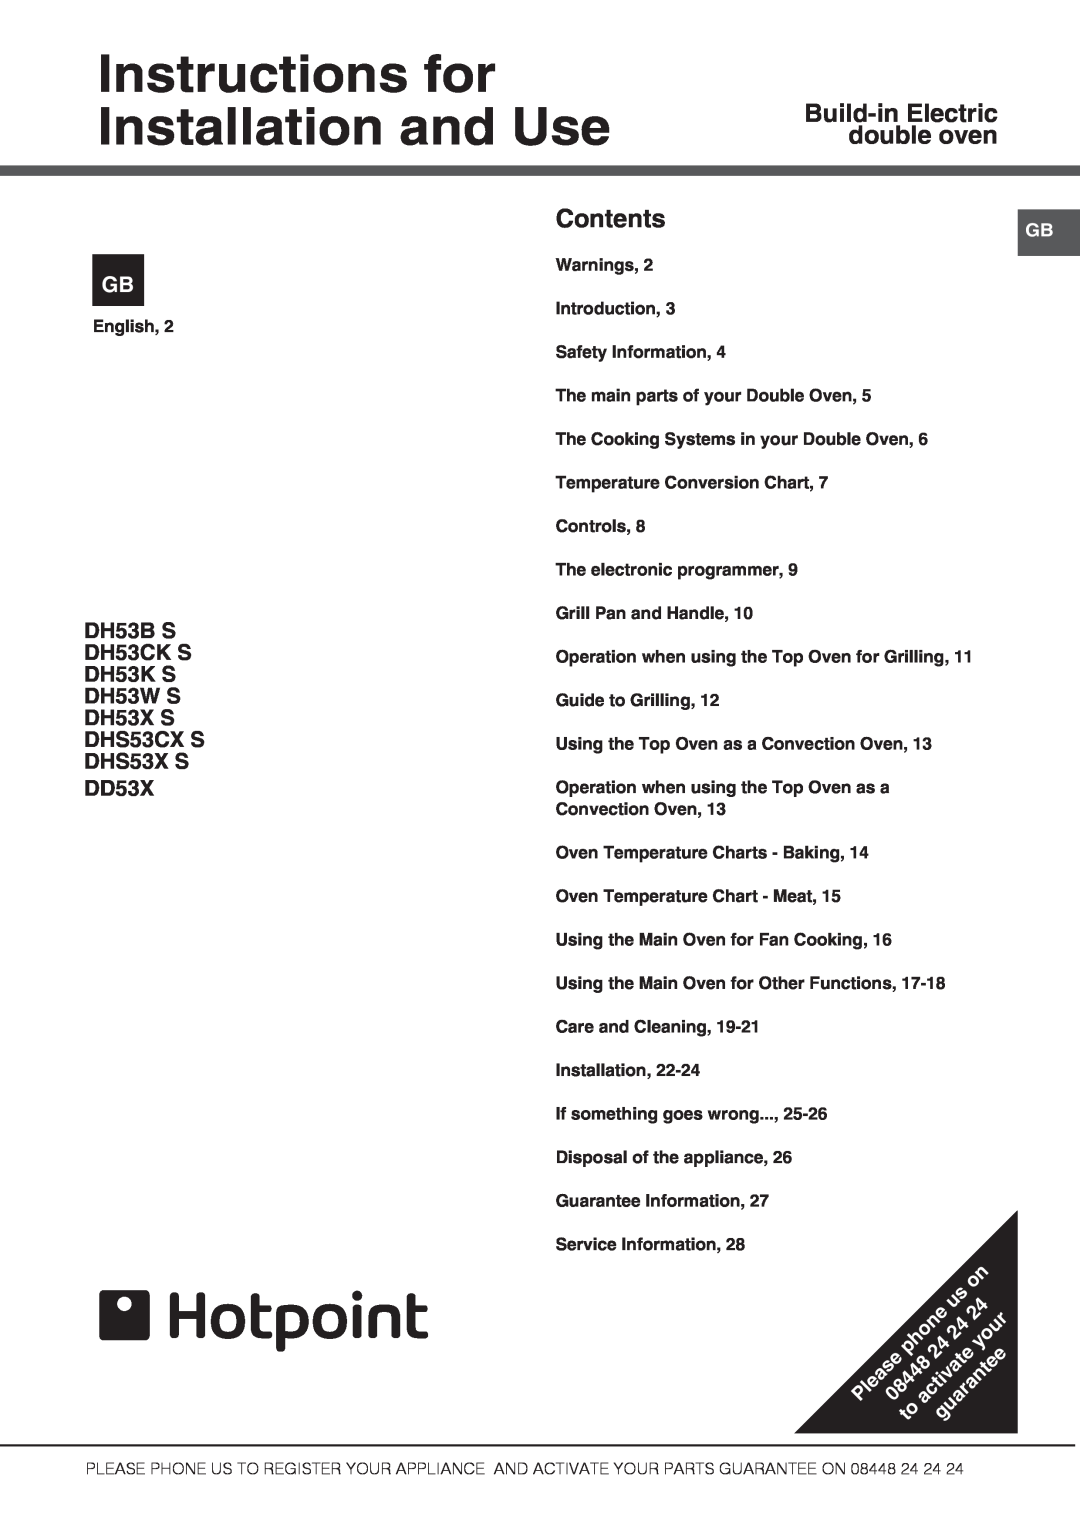 Hotpoint DH53W S manual Instructions for Installation and Use, Build-in Electric double oven, Contents, DD53X, English 